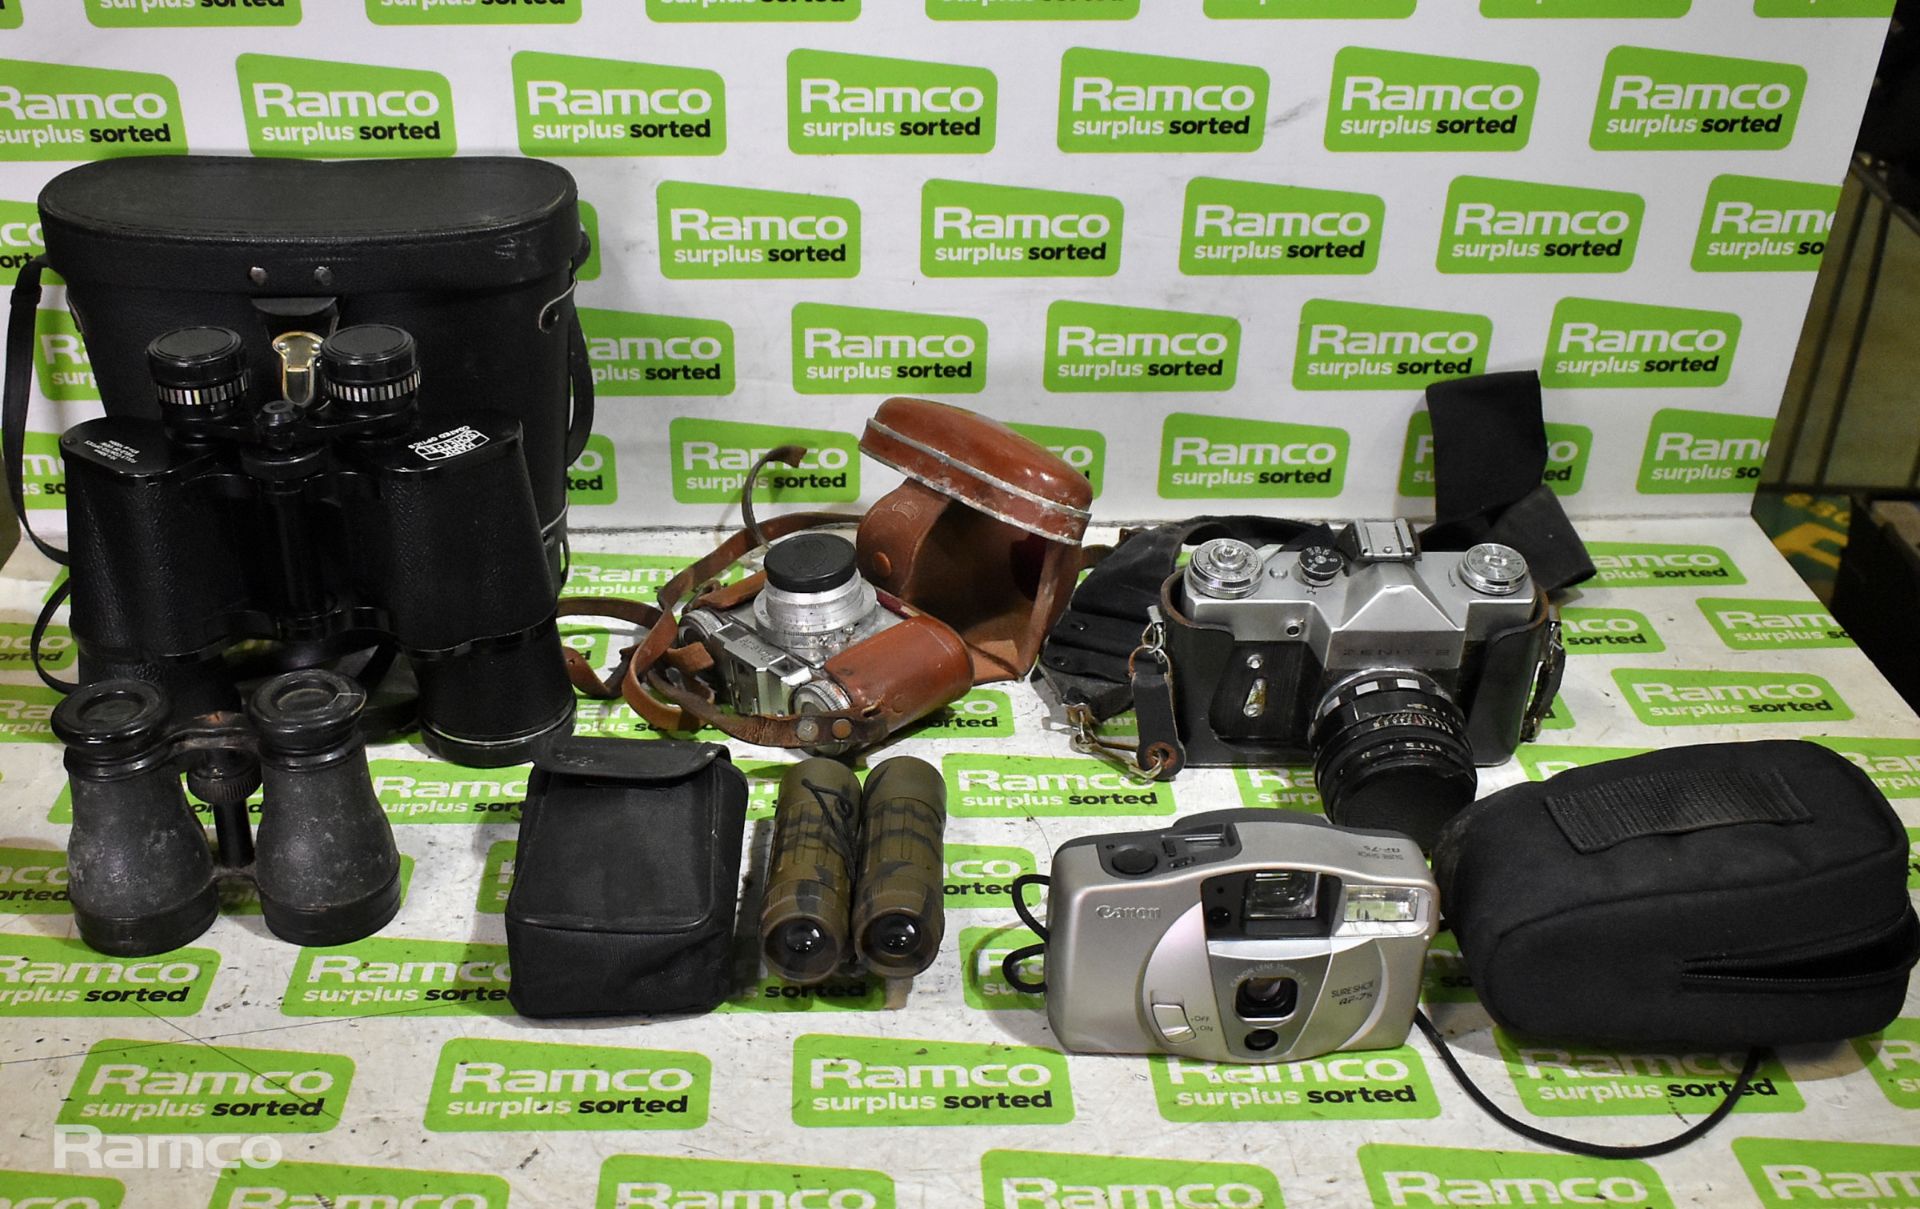 3x Pairs of binoculars and 3x cameras with and without cases